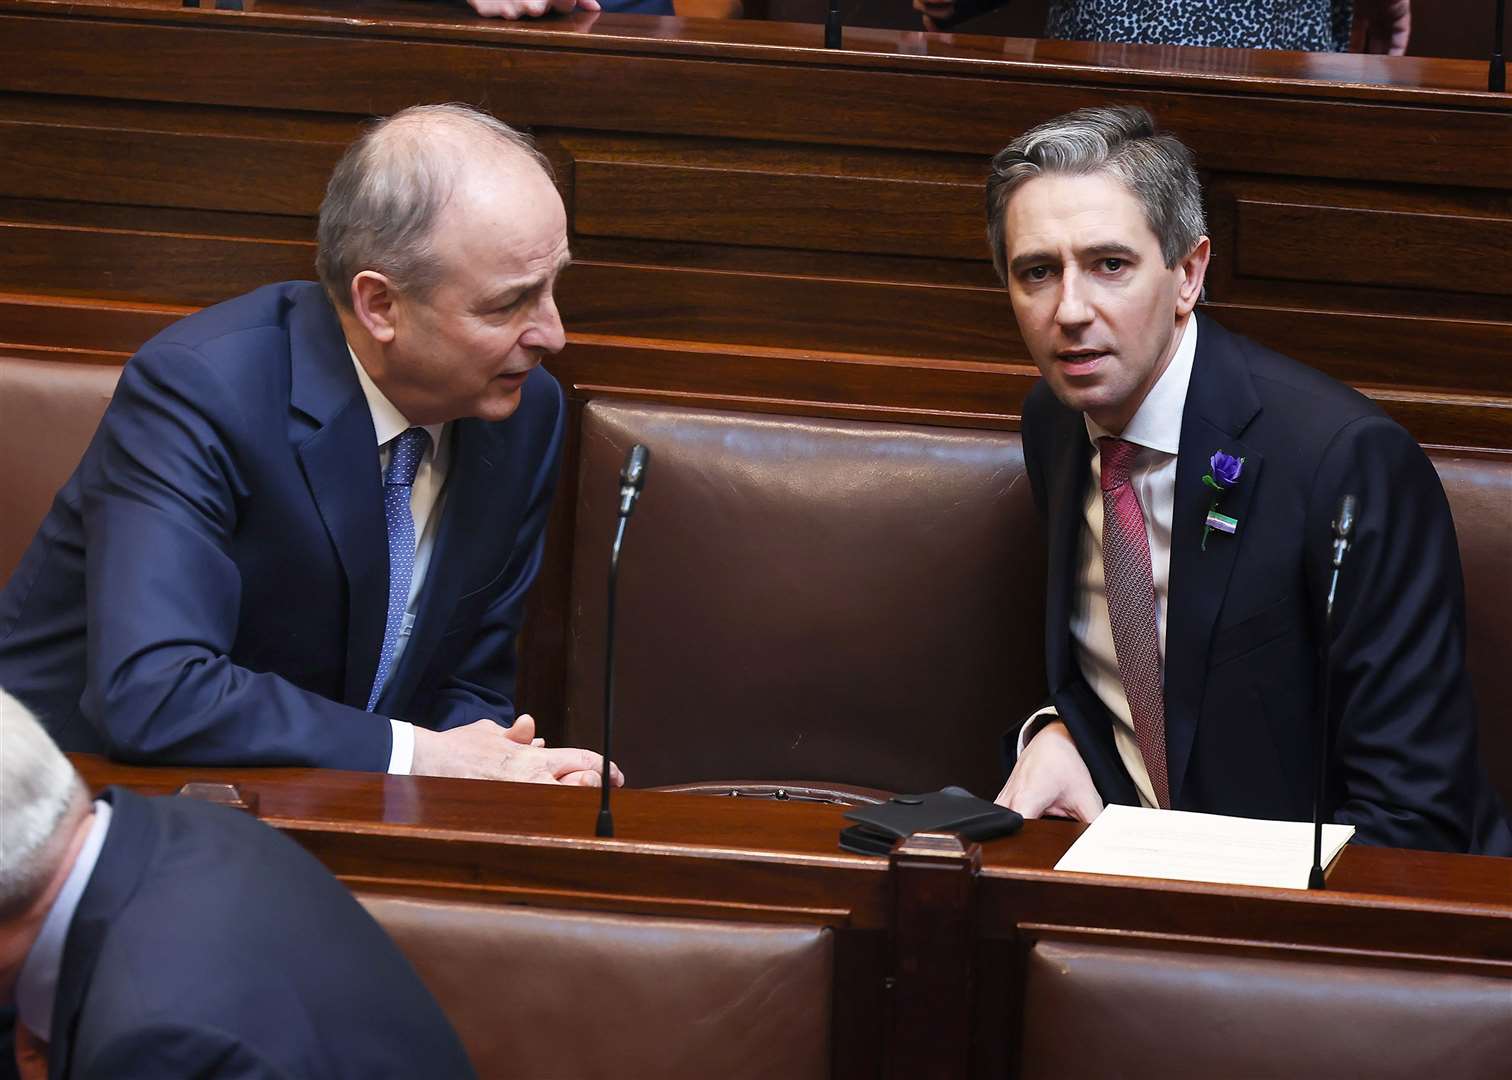 Mr Harris talking to Tanaiste Micheal Martin in the Dail Chamber (Maxwell Photography/PA)